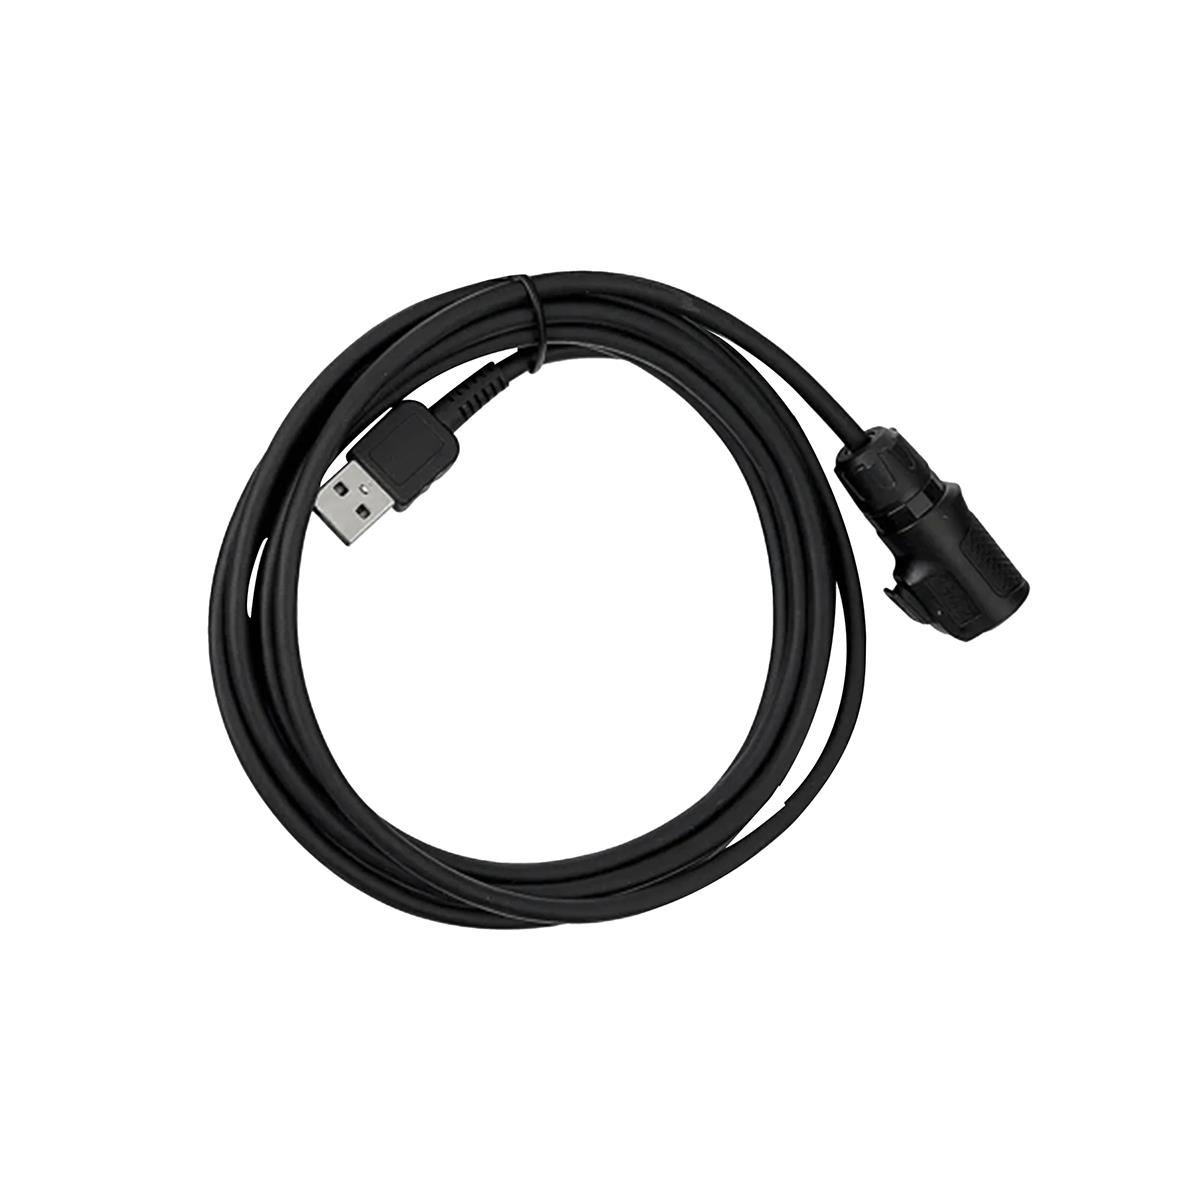 Image of SiOnyx 10' USB-A Power Cable for Nightwave Navigation Camera